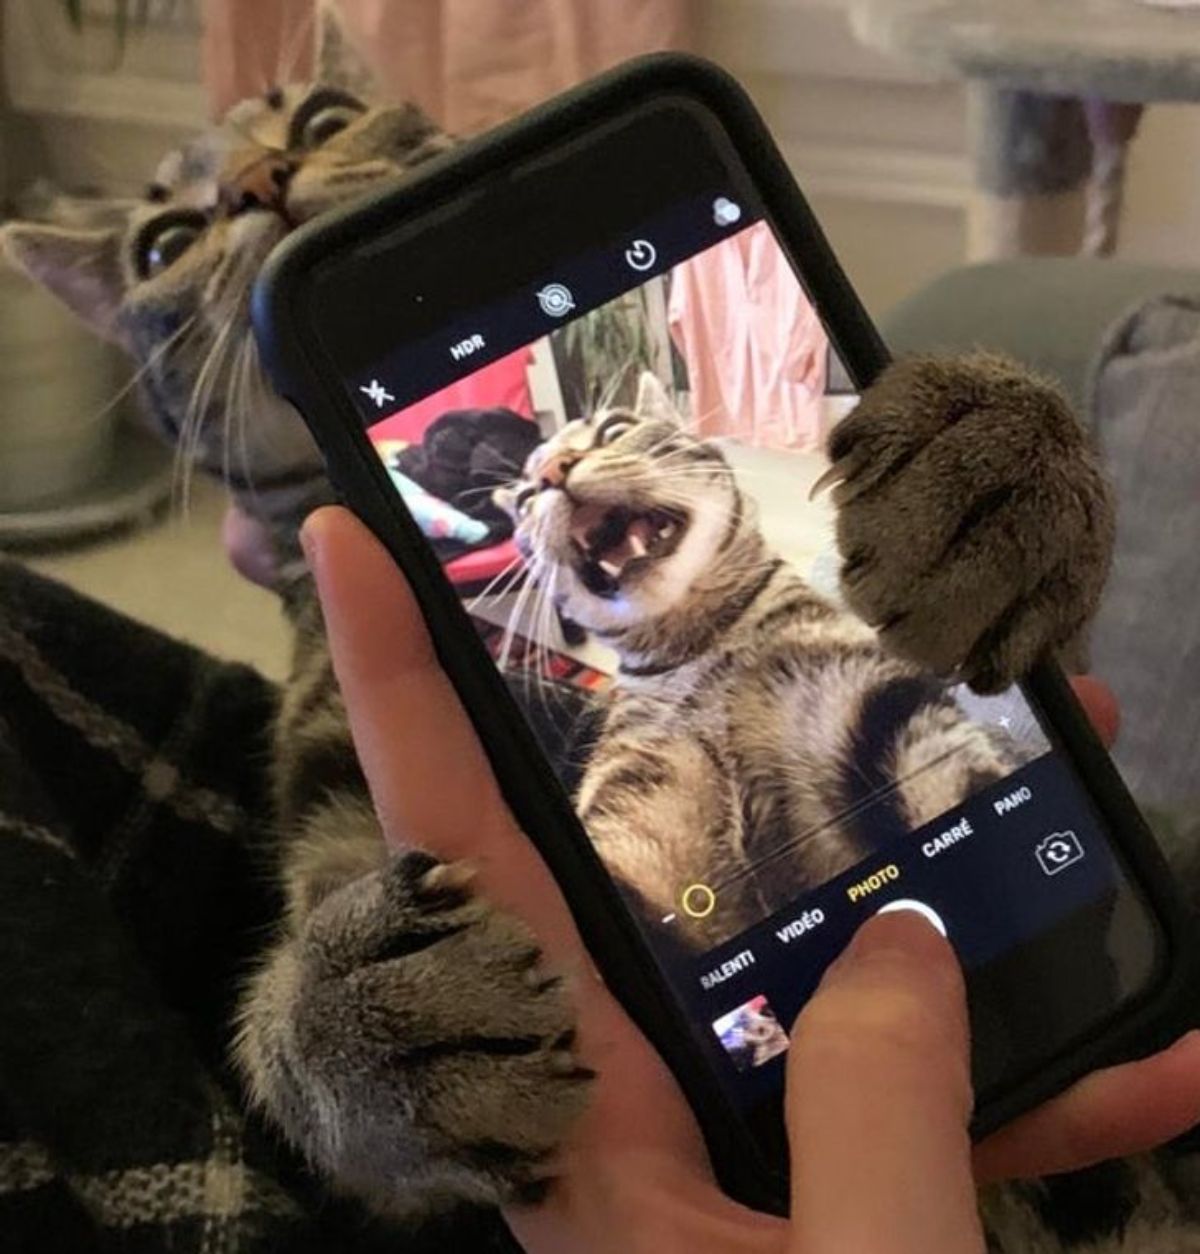 brown tabby cat with the mouth open in a scream on the camera on a phone with the cat behind the phone and holding on to it